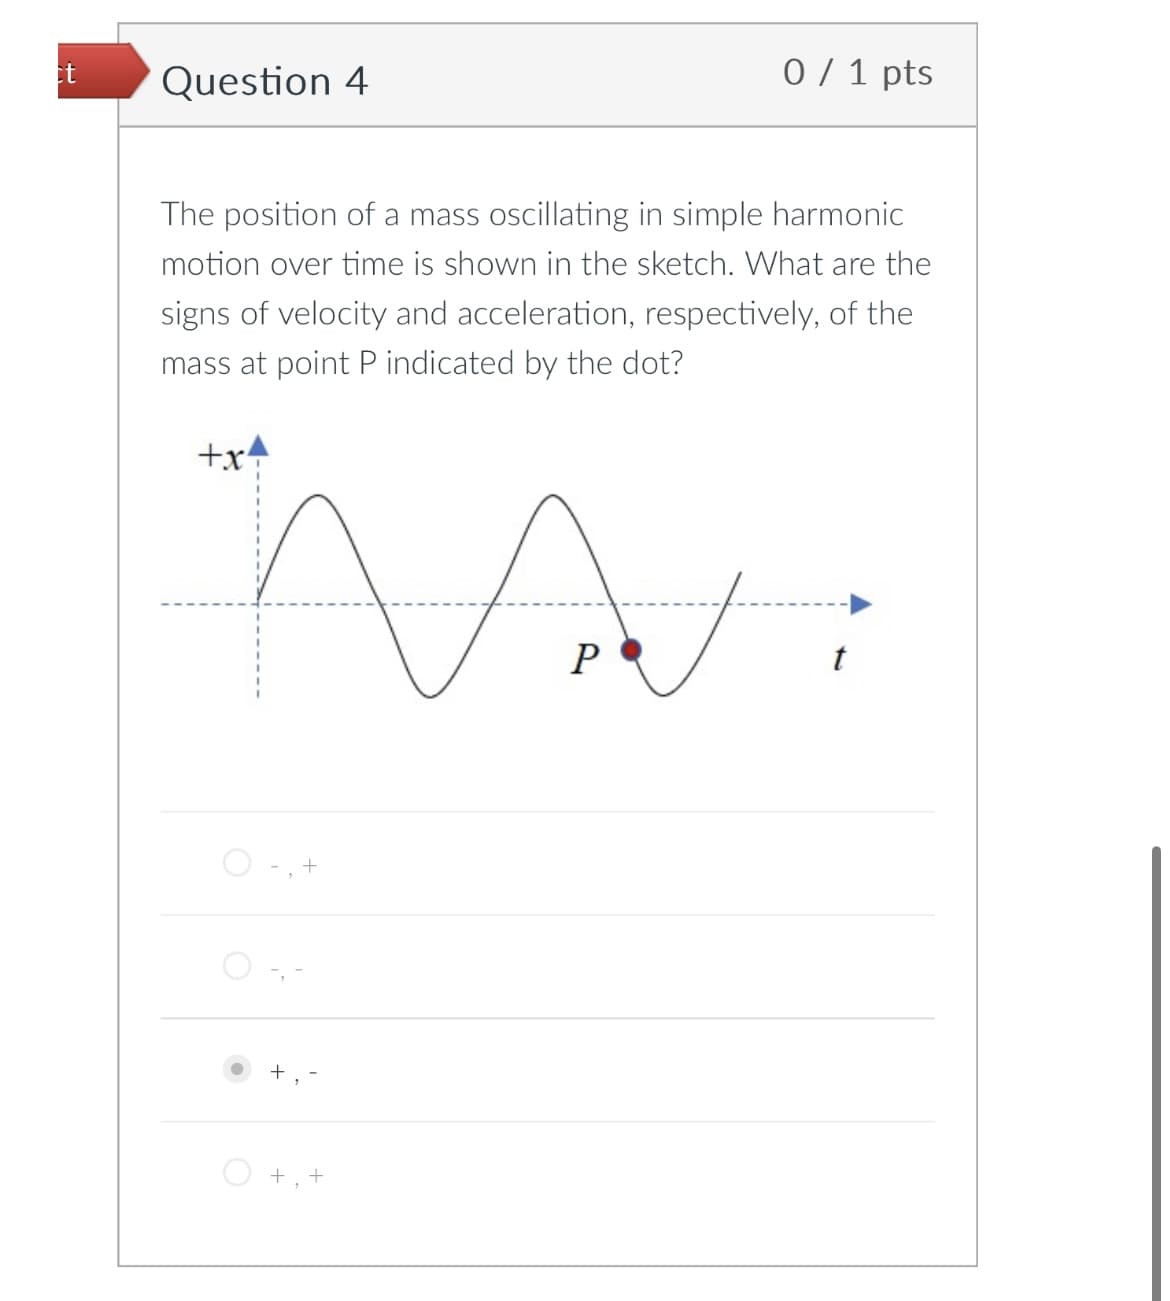 Et
Question 4
0/1 pts
The position of a mass oscillating in simple harmonic
motion over time is shown in the sketch. What are the
signs of velocity and acceleration, respectively, of the
mass at point P indicated by the dot?
+x
+
P